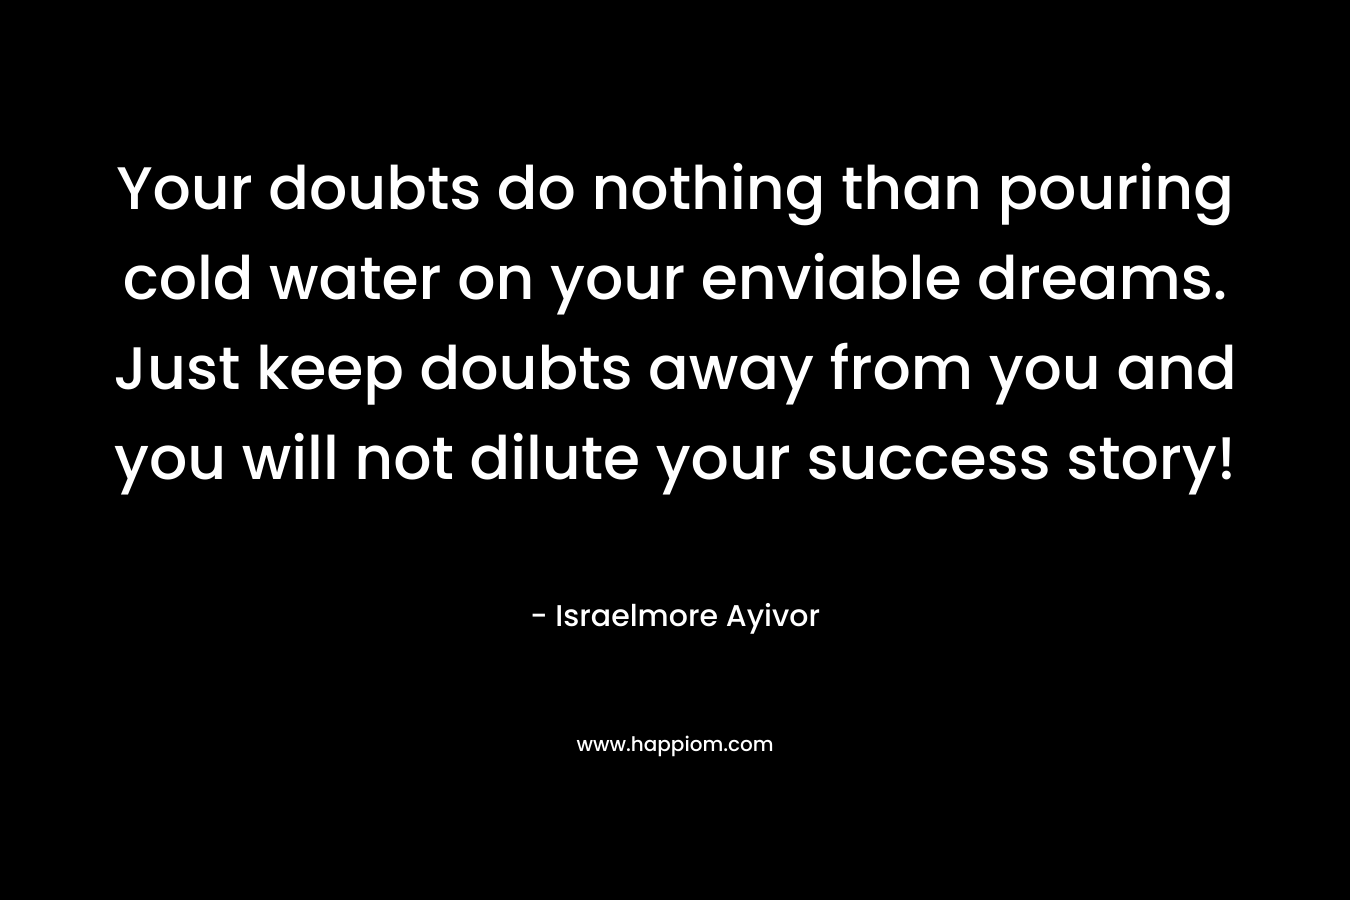 Your doubts do nothing than pouring cold water on your enviable dreams. Just keep doubts away from you and you will not dilute your success story! – Israelmore Ayivor